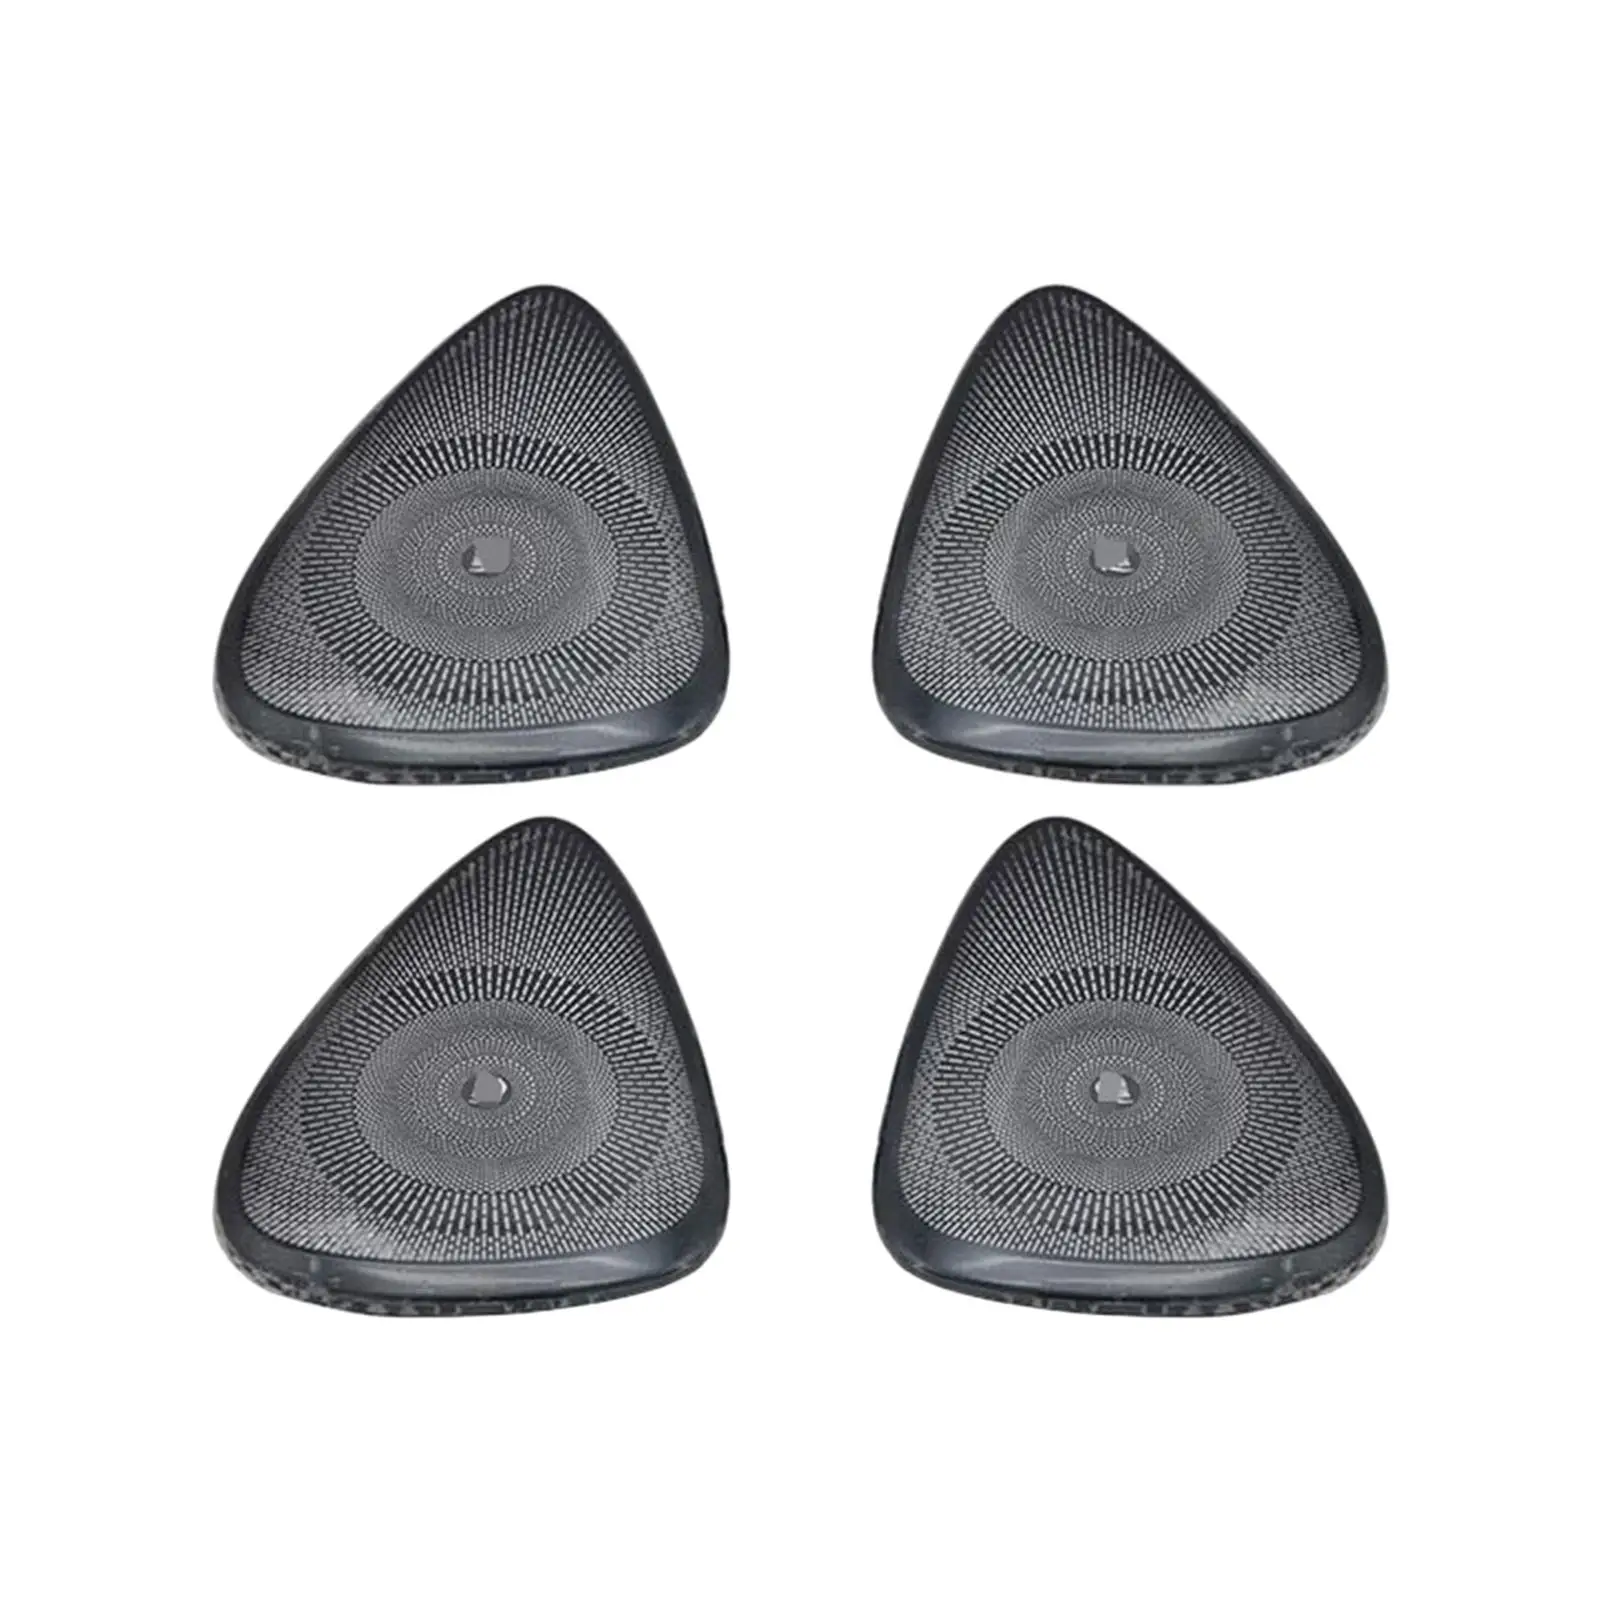 4 Pieces Replacement Door Speaker Cover for Byd Dolphin 23 Professional